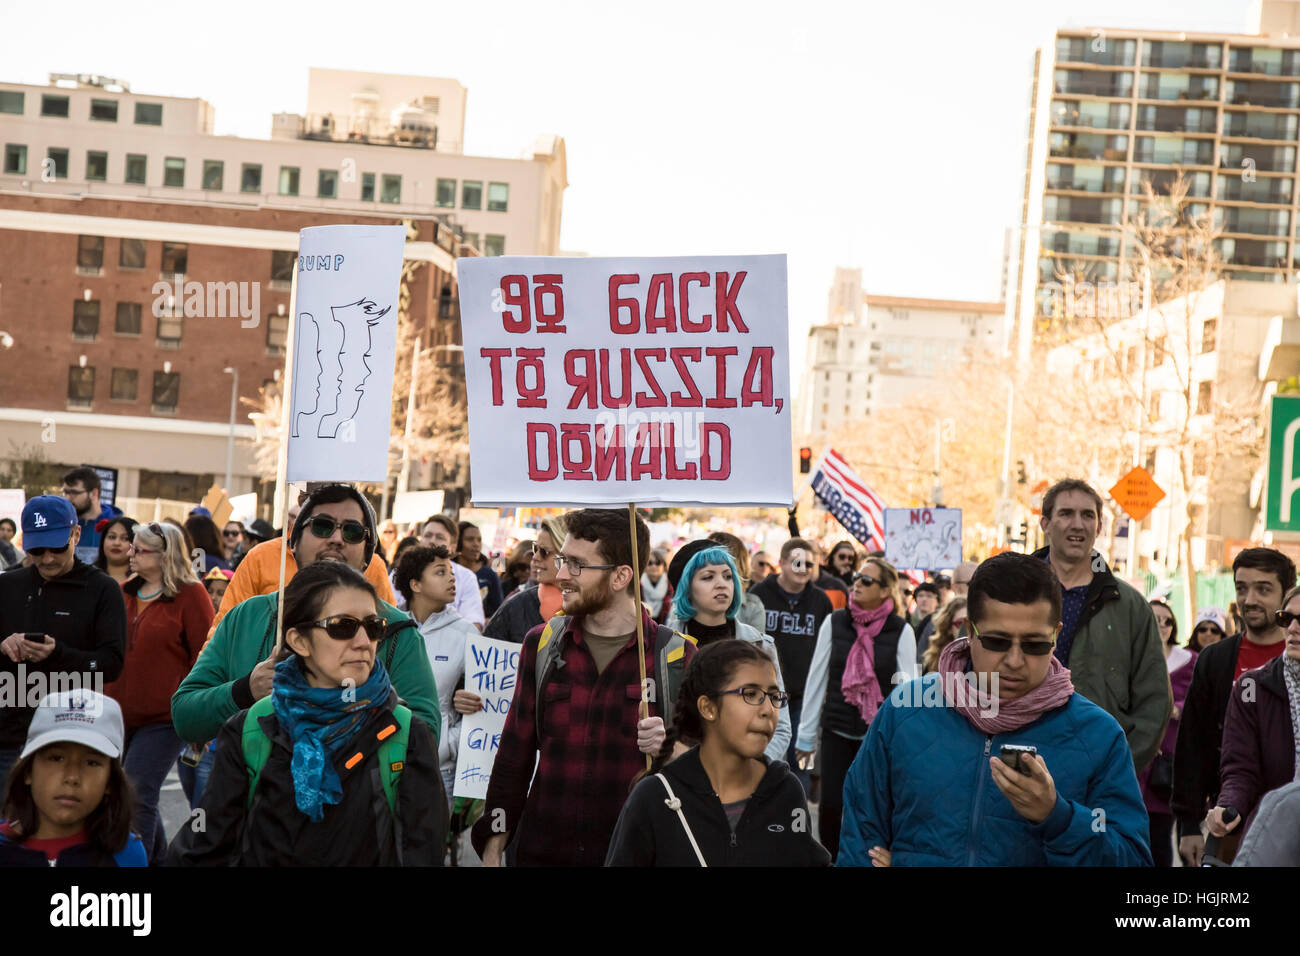 Los Angeles, USA. 21st January, 2017. Thousands of Angelenos gathered in Downtown Los Angeles to march in solidarity with the Women’s March in Washington, DC, protesting Donald Trump’s policies and rhtetoric. Credit: Andie Mills/Alamy Live News Stock Photo